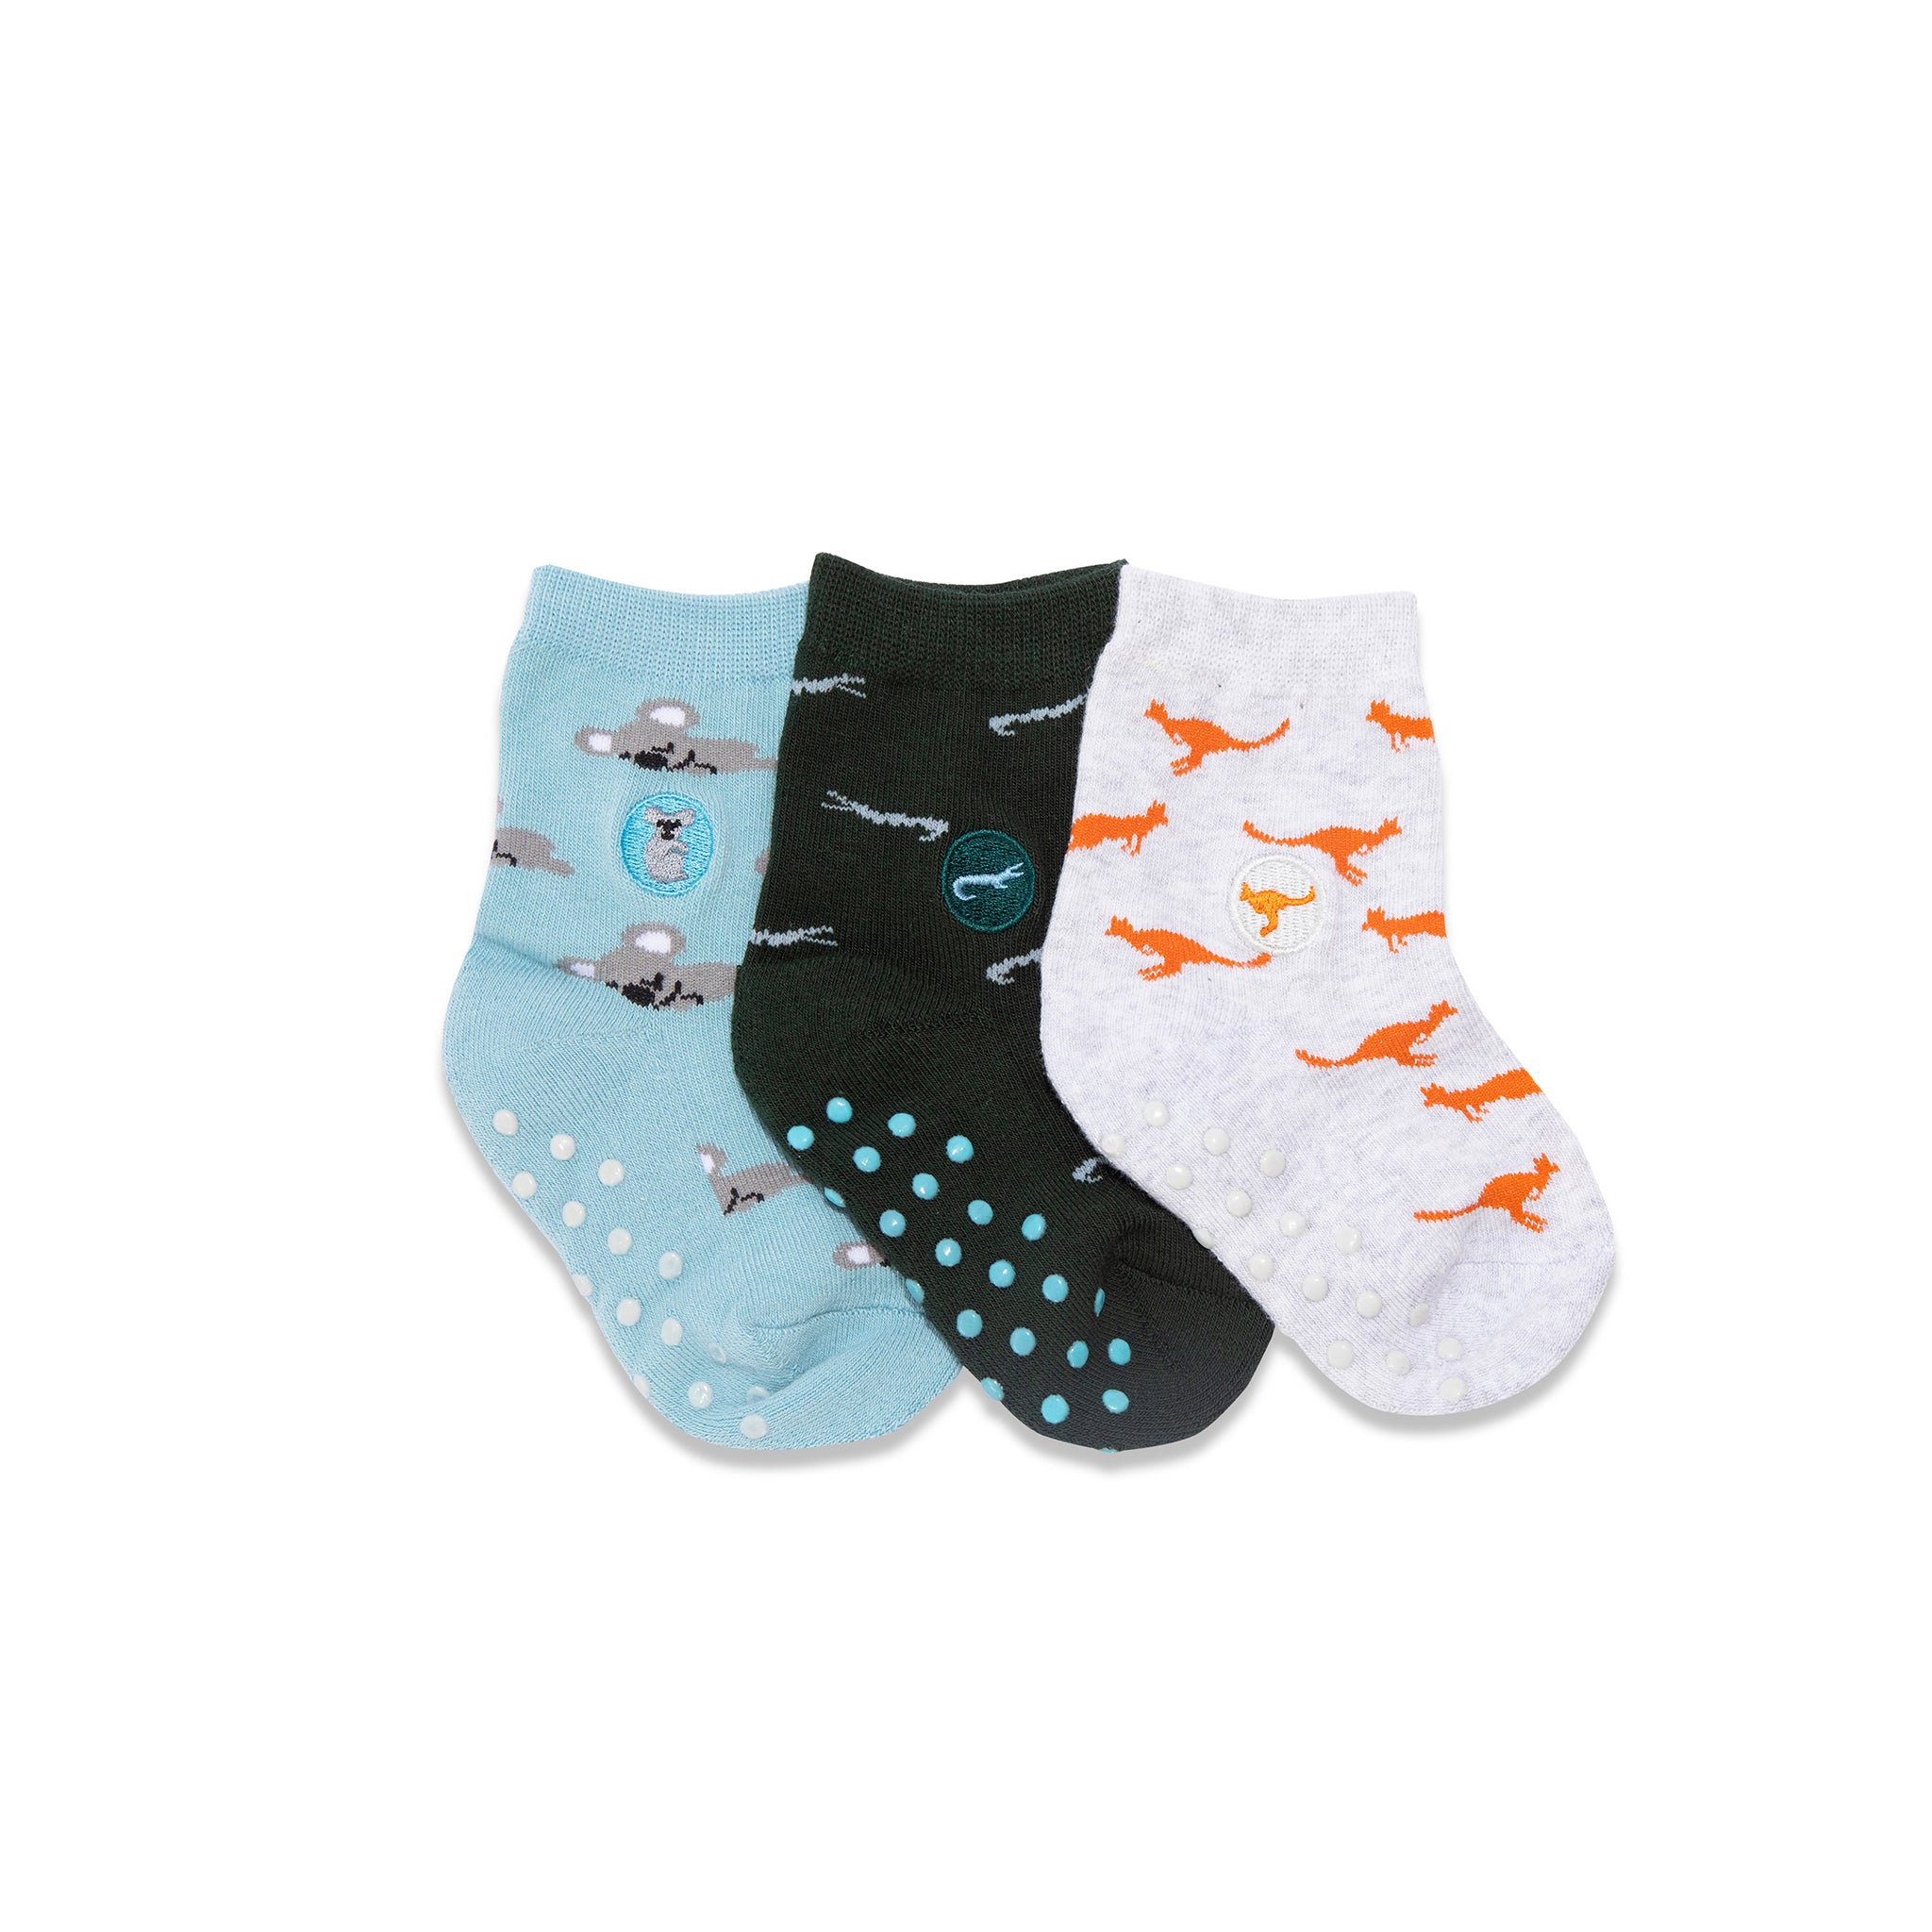 Toddler Socks that Protect Animals